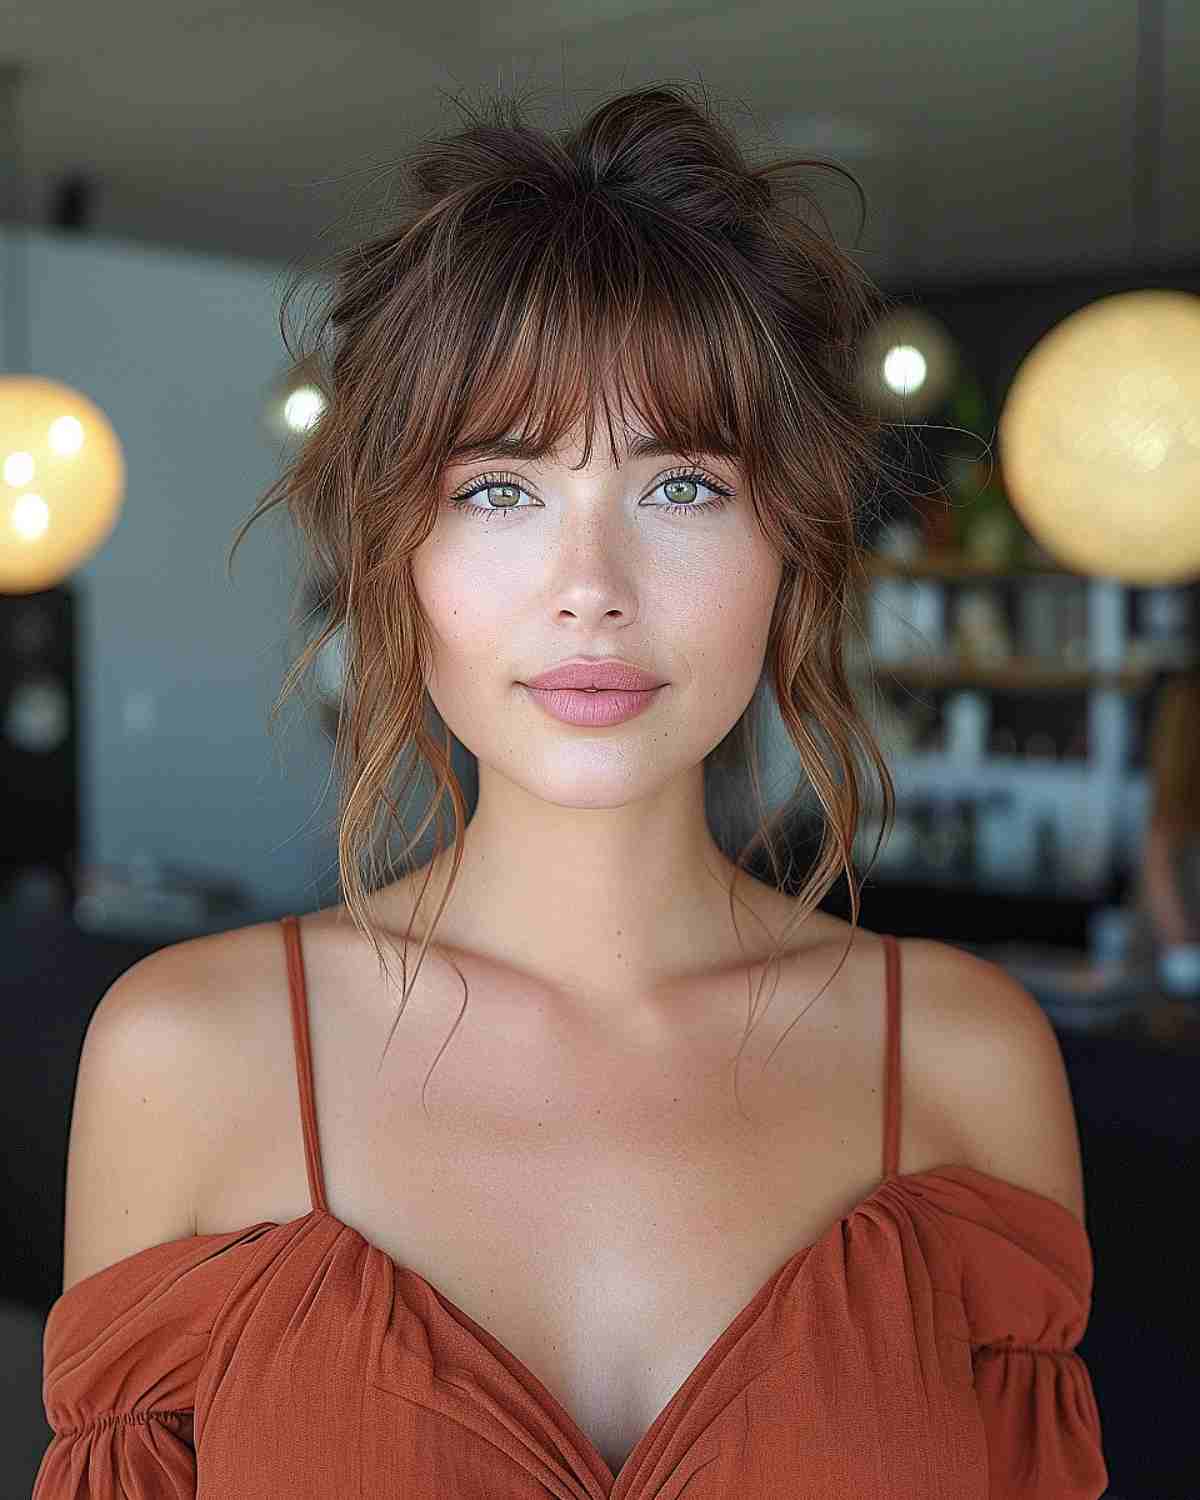 Undone updo with wispy bangs for date night